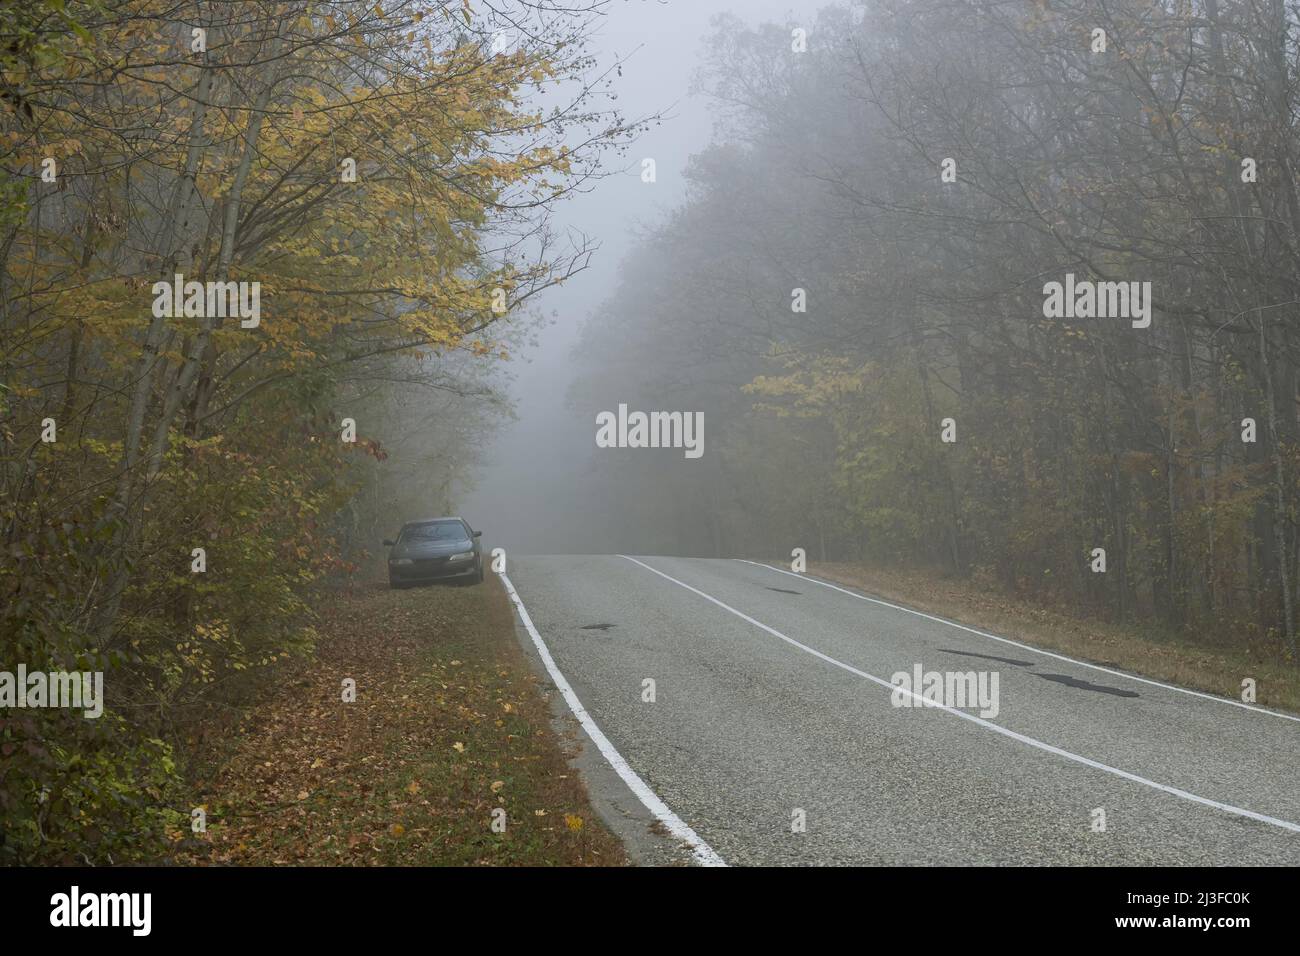 A foggy morning on a country road in an autumn forest. The asphalt road with white markings goes down. A black car stands on the side of the road. Tra Stock Photo